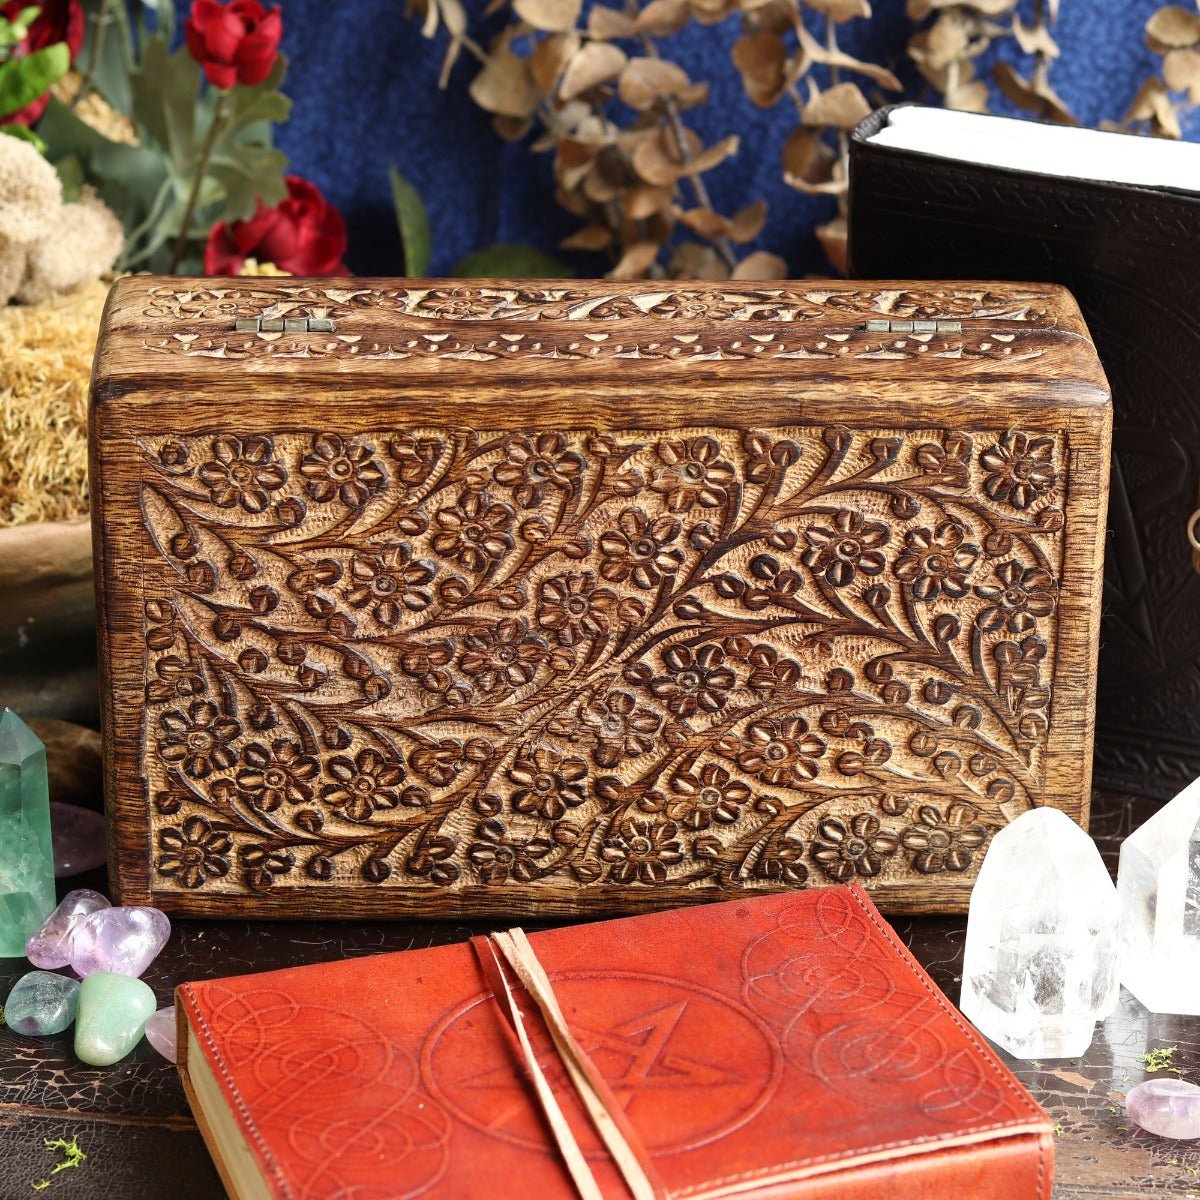 Floral Carved Wood Box - 13 Moons